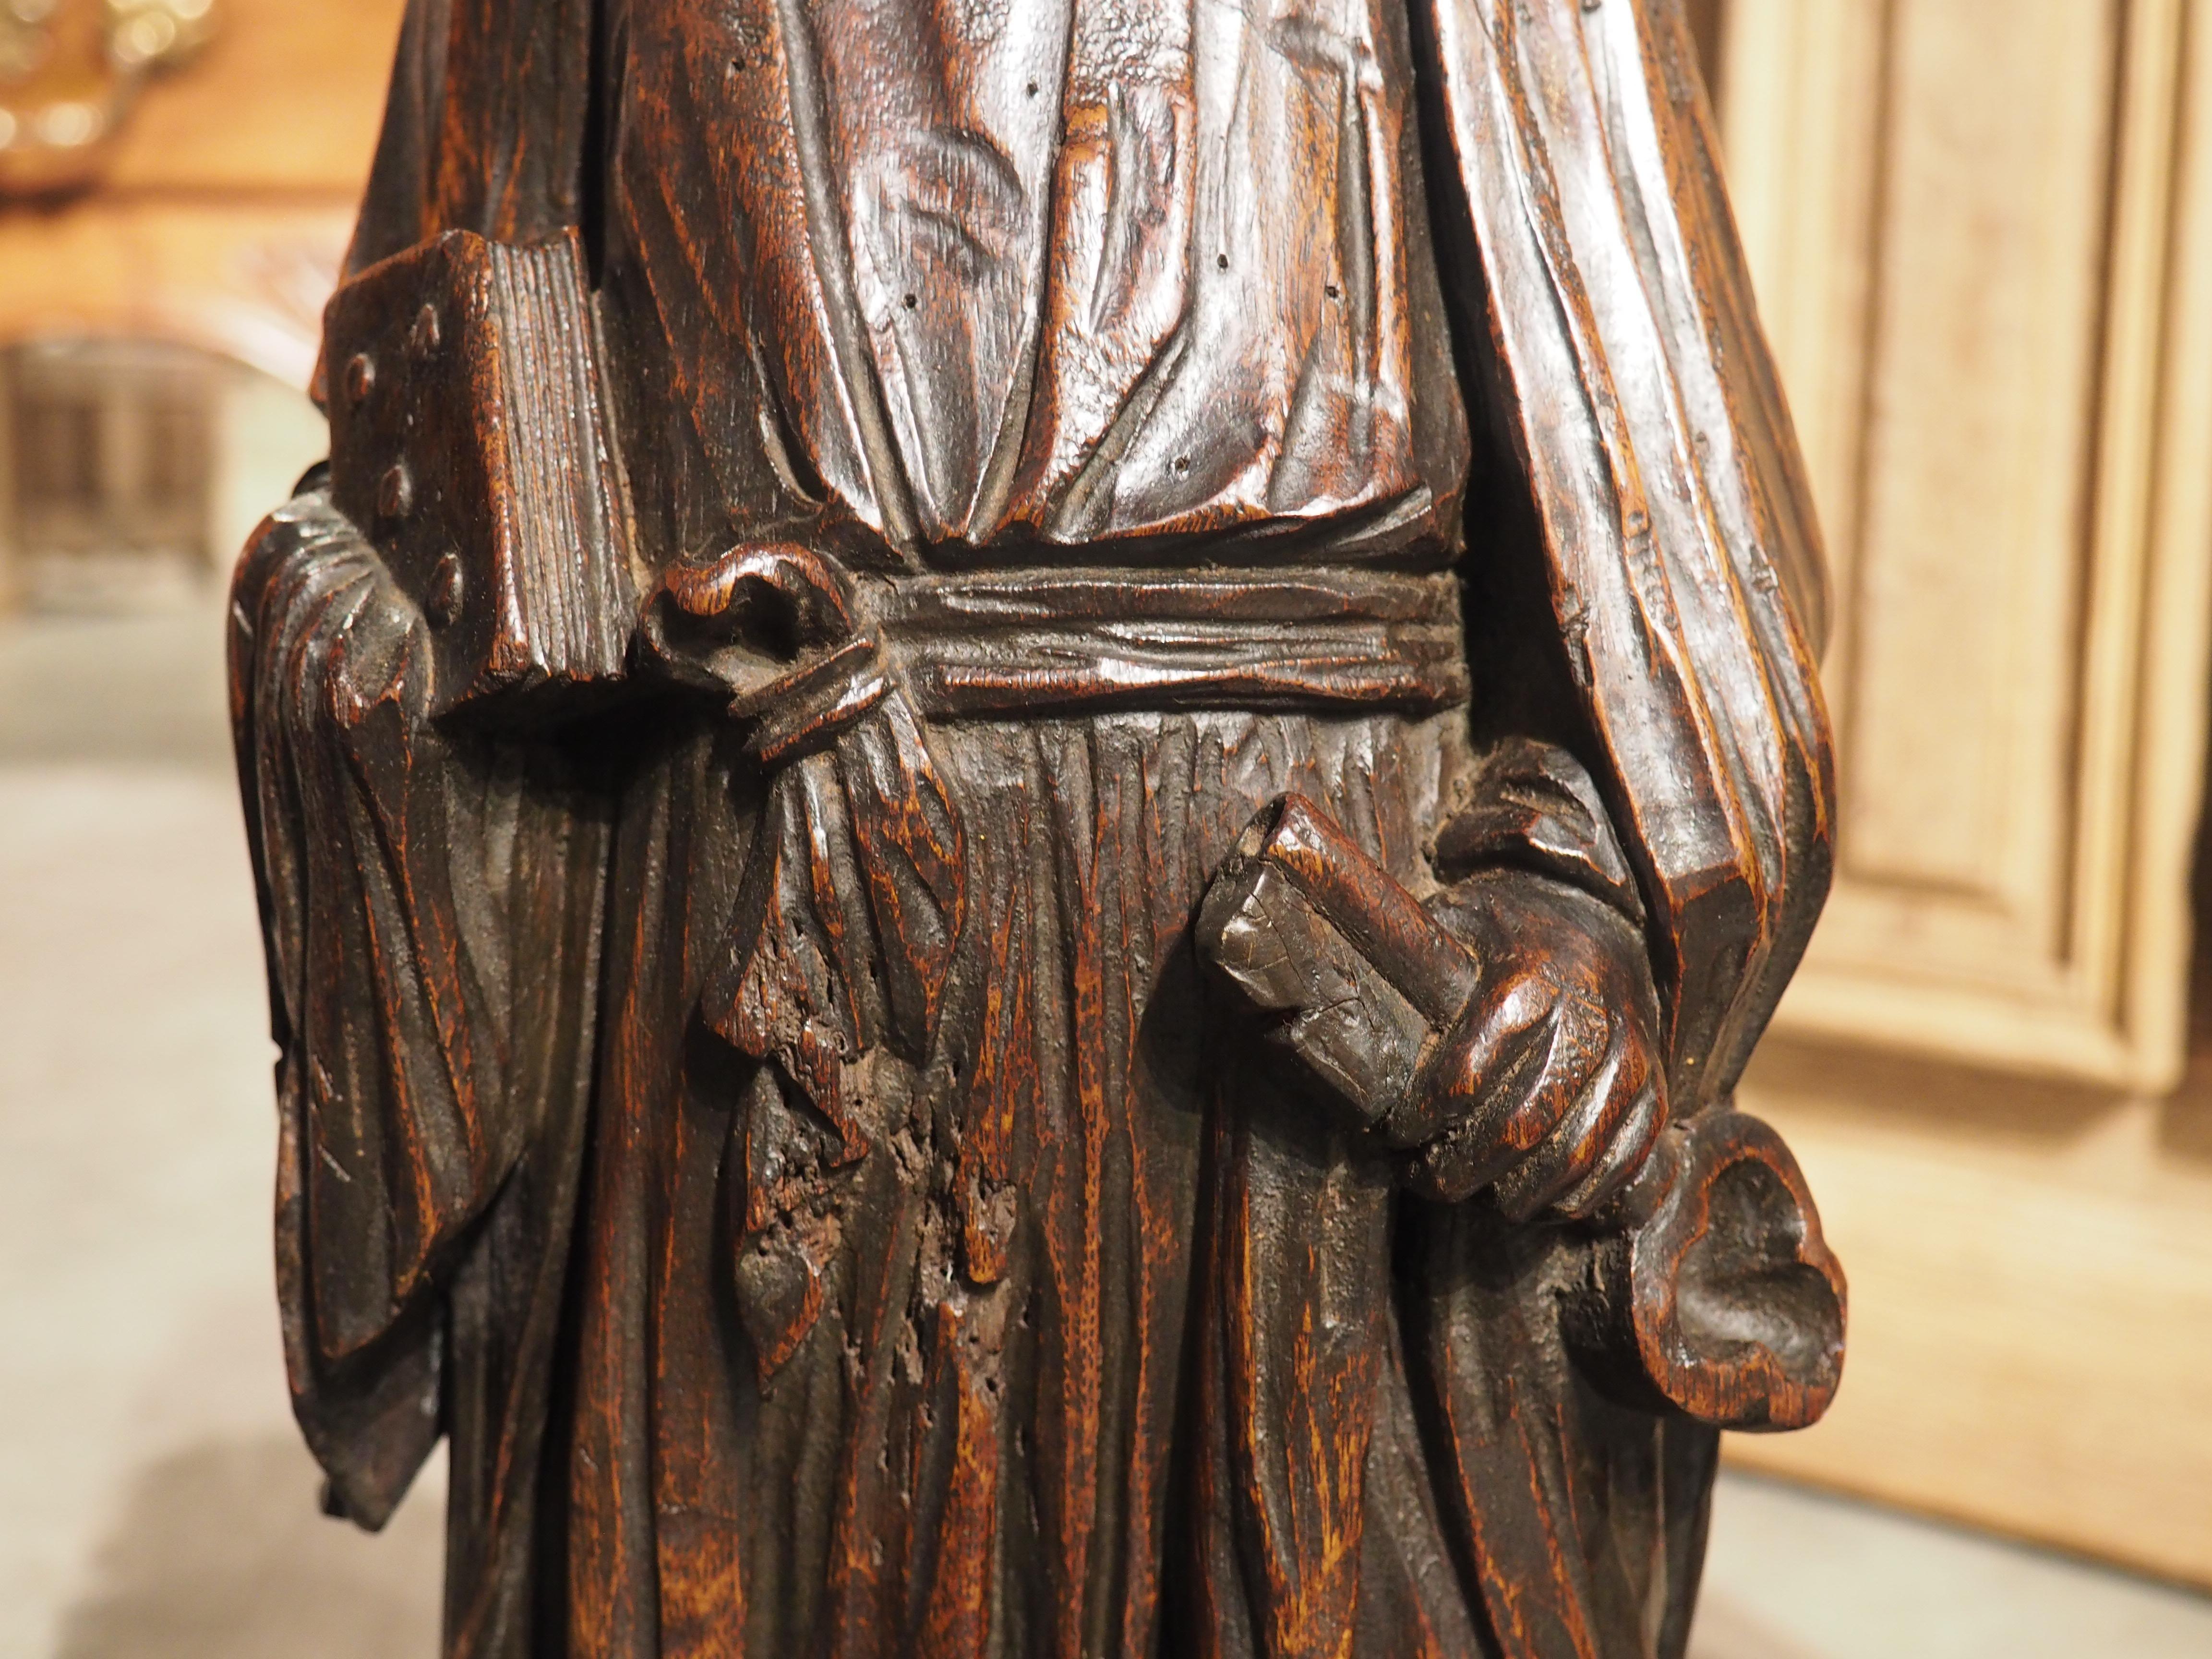 Circa 1800 Carved Oak Sculptures of the Apostles, James, John, Peter, and Paul For Sale 1